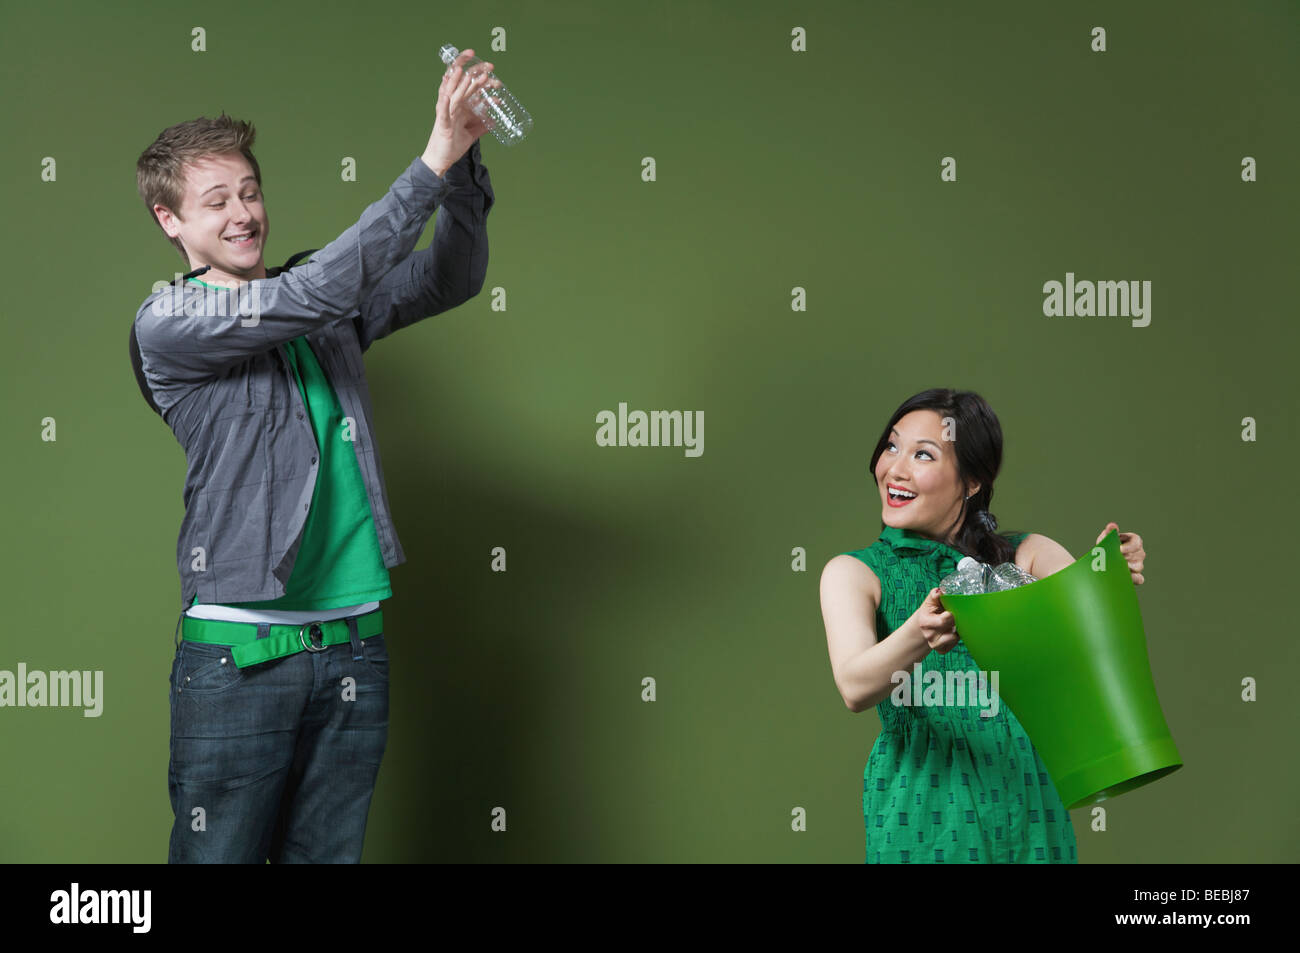 Woman holding a recycling bin and a man throwing an empty water bottle Stock Photo